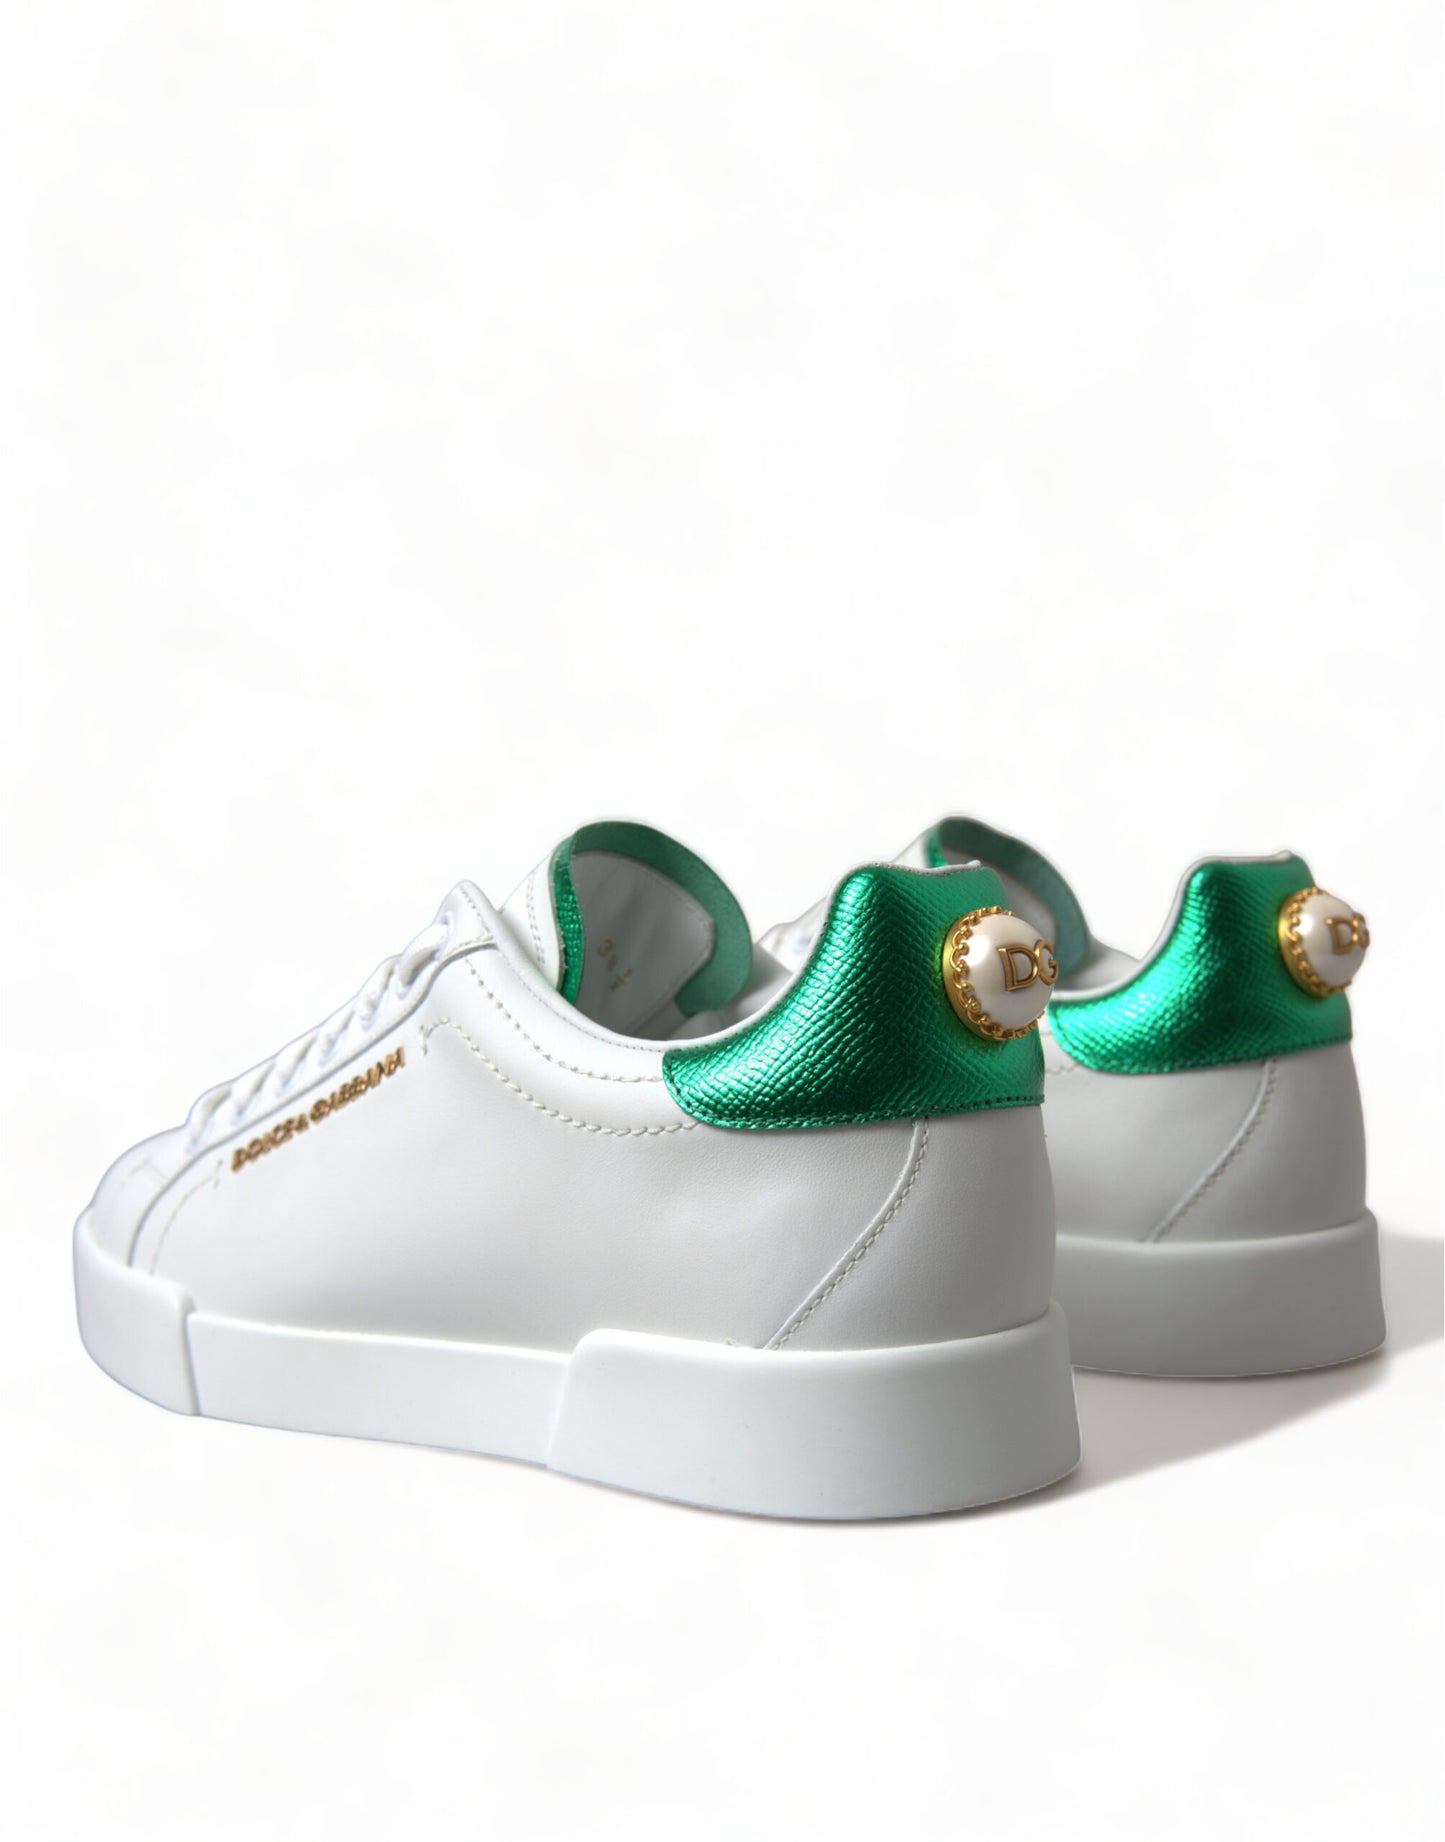 Dolce & Gabbana Chic White Sneakers with Green Heel Accent